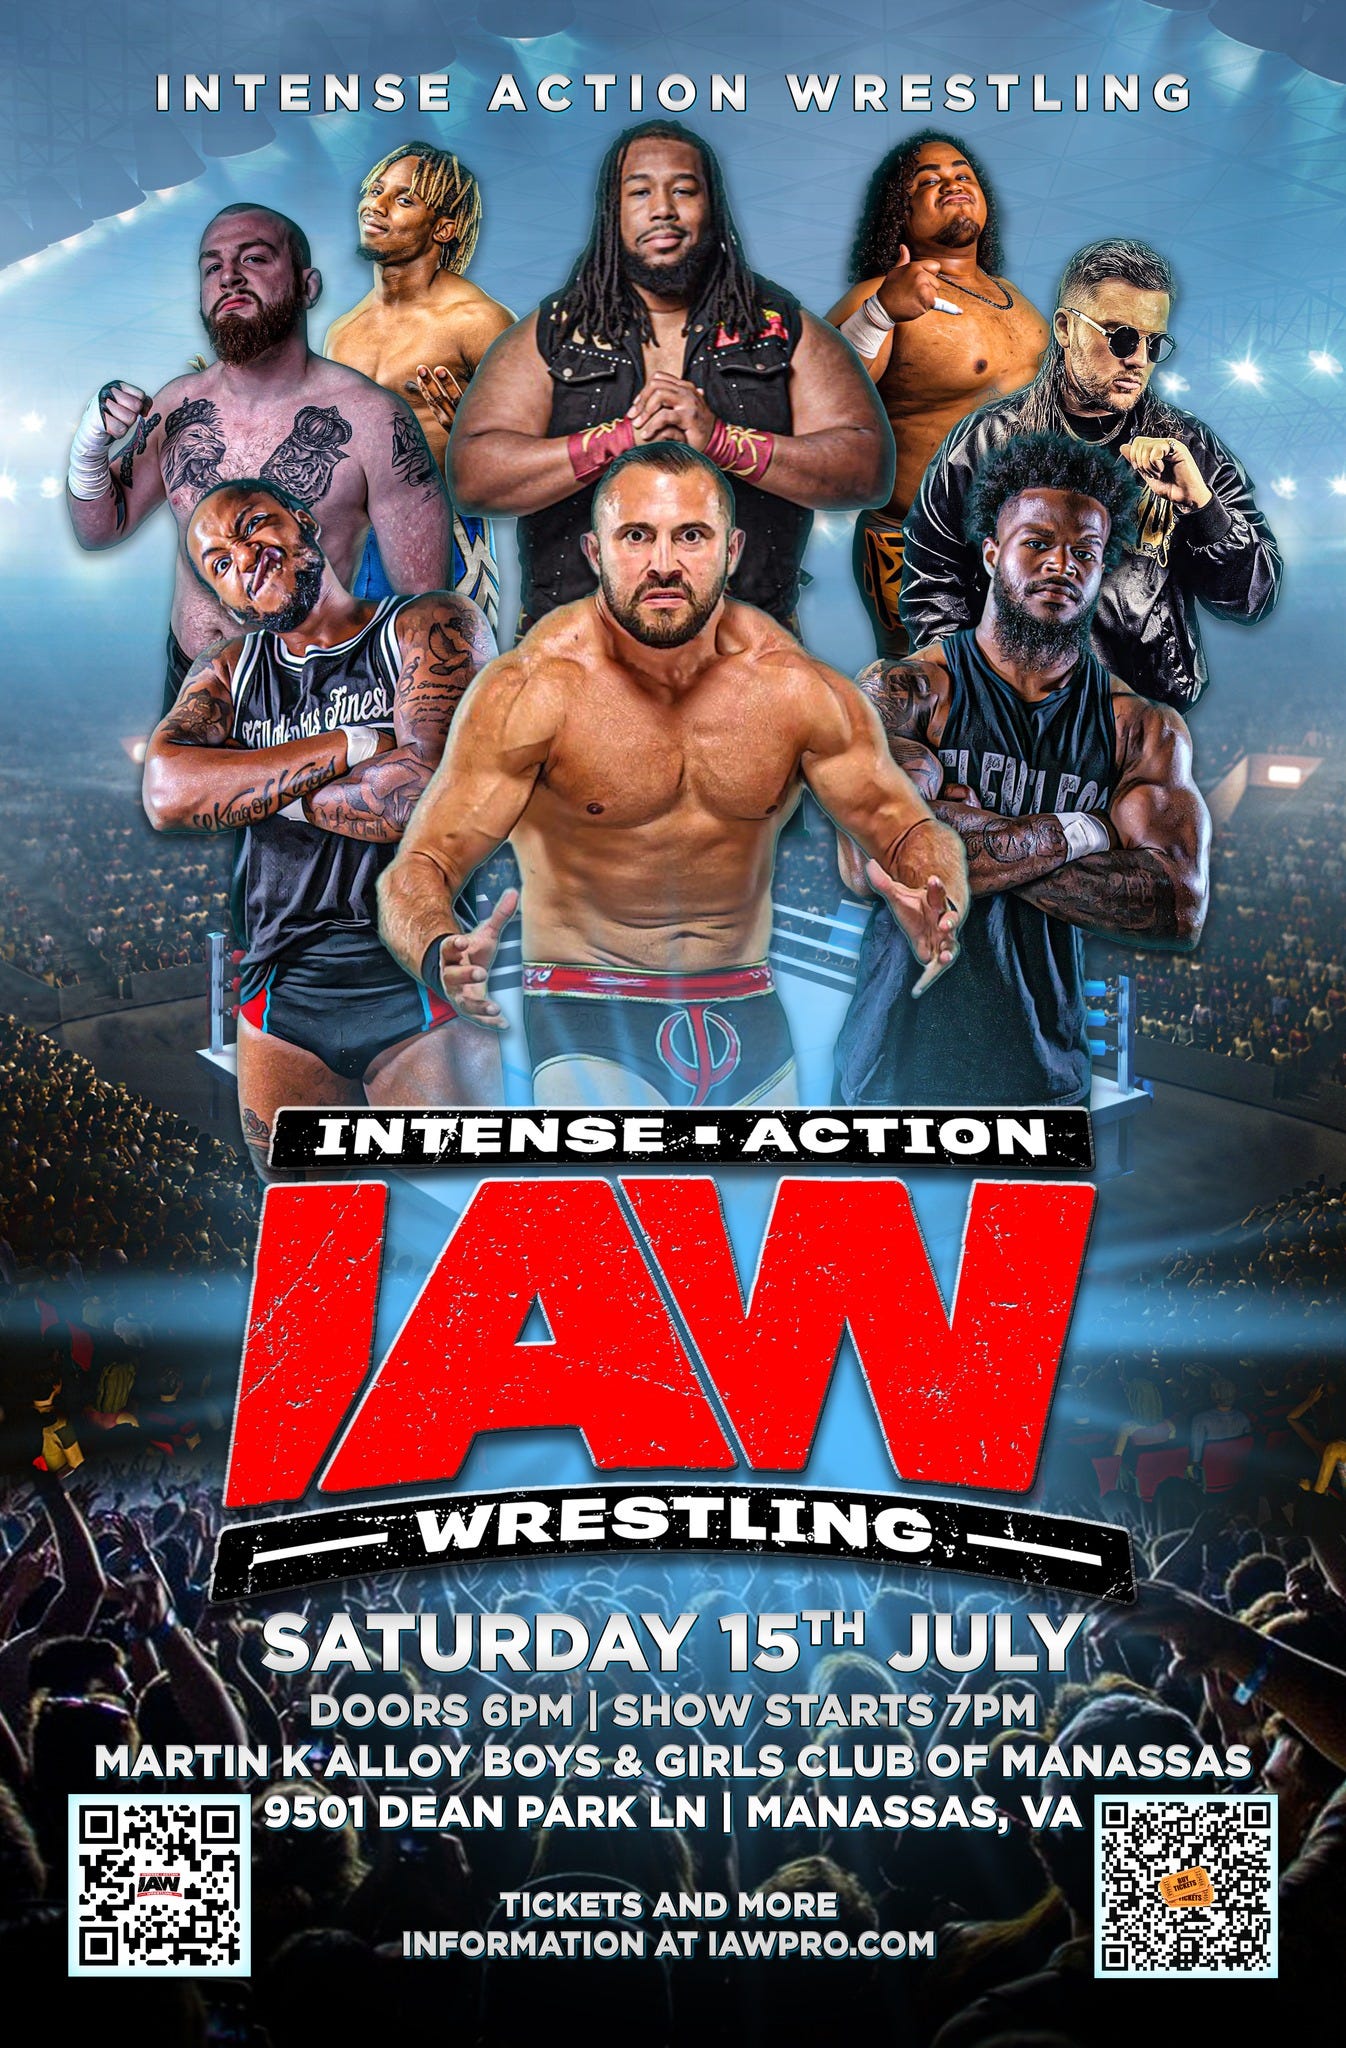 May be an image of 6 people and text that says 'INTENSE ACTION WRESTLING Fines INTENSE ACTION JAW WRESTLING SATURDAY 15TH JULY DOORS 6PM SHOW STARTS 7PM MARTIN K ALLOY BOYS & GIRLS CLUB OF MANASSAS 9501 DEAN PARK LN MANASSAS, VA 口 TICKETS AND MORE INFORMATION AT IAWPRO.COM'